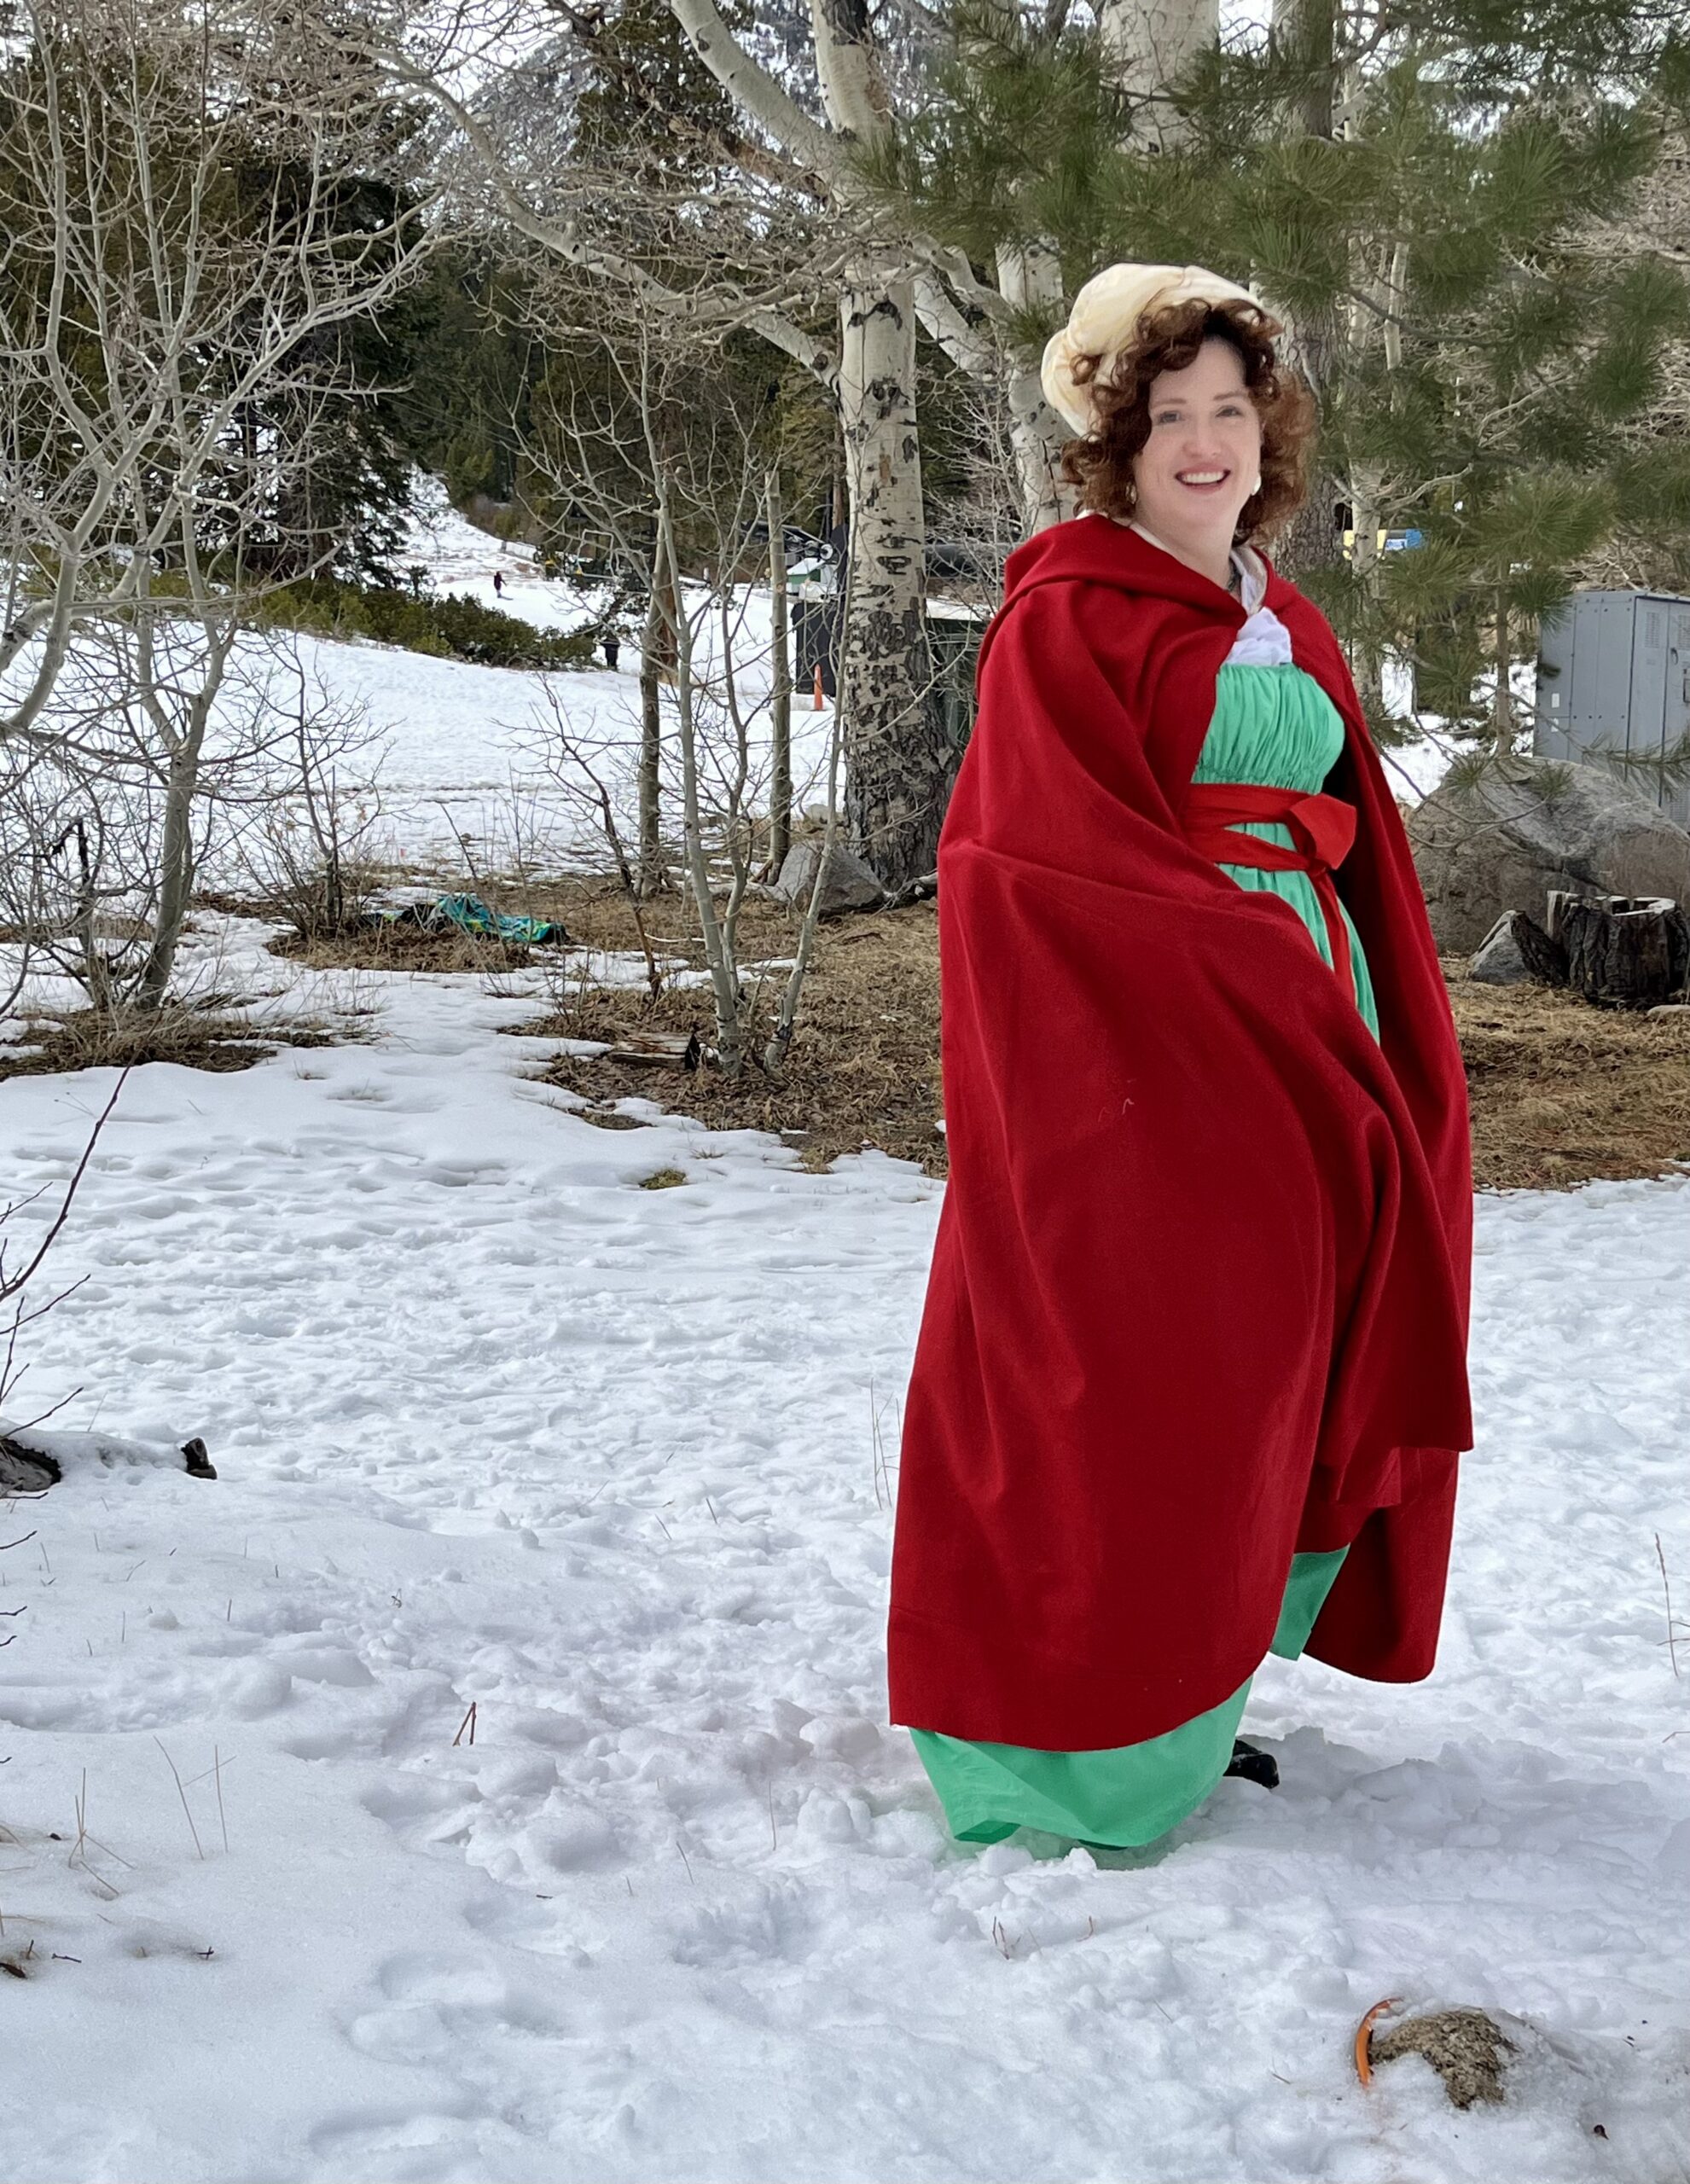 Tabubilgirl walks toward the camera wearing a green 1790s round gown and wrapped in a red cardinal cloak